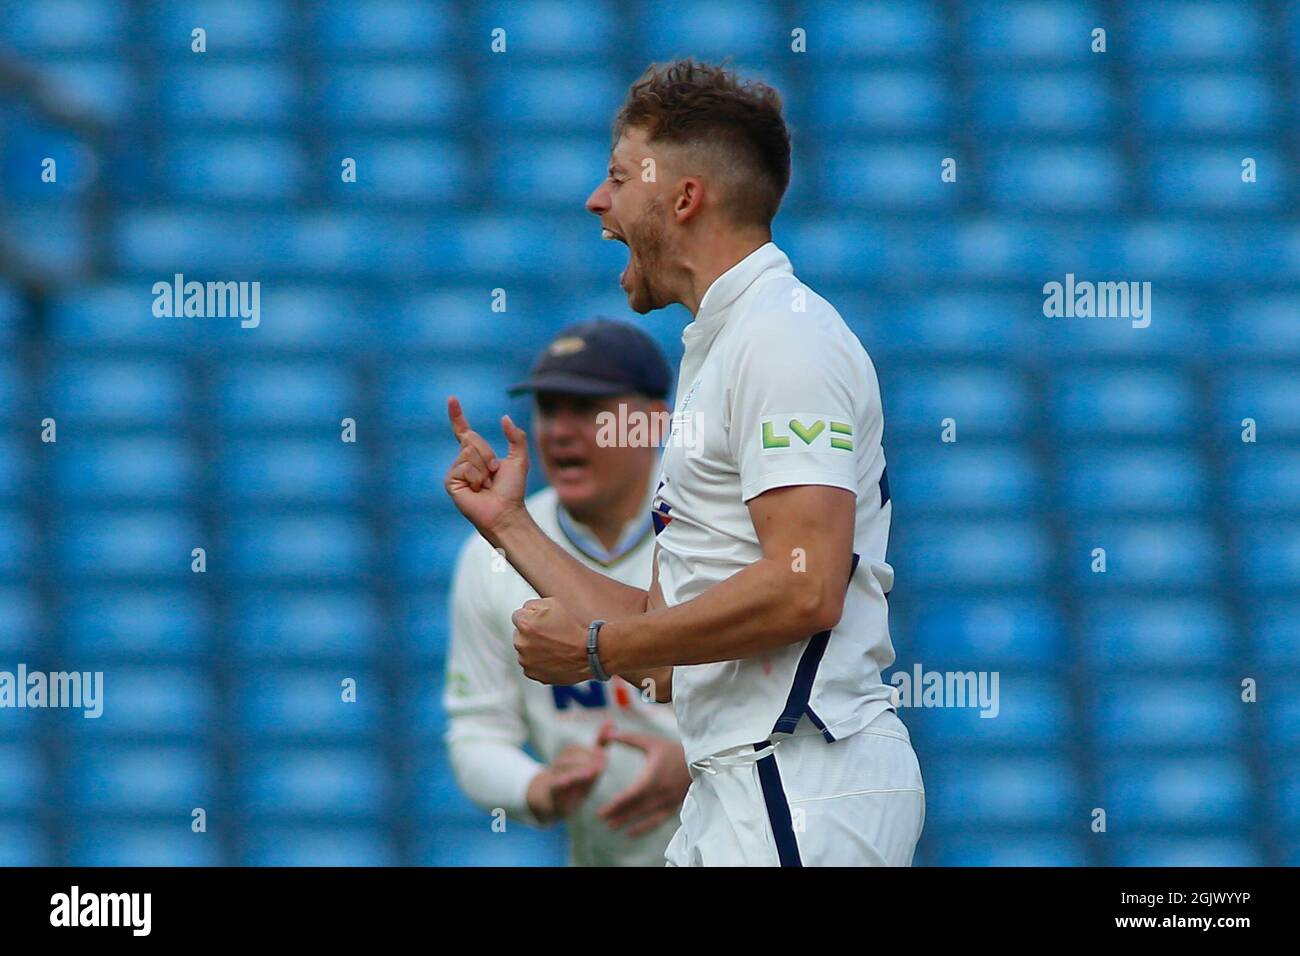 Leeds, UK. 12th Sep, 2021. Yorkshire County Cricket, Emerald Headingley Stadium, Leeds, West Yorkshire, 12th September 2021. LV= Insurance County ChampionshipÕs Division One - Yorkshire County Cricket Club vs Warwickshire CCC Day 1. Ben Coad (C) of Yorkshire County Cricket Club celebrates taking the wicket of Will Rhodes of Warwickshire CCC caught by Harry Duke. Credit: Touchlinepics/Alamy Live News Stock Photo